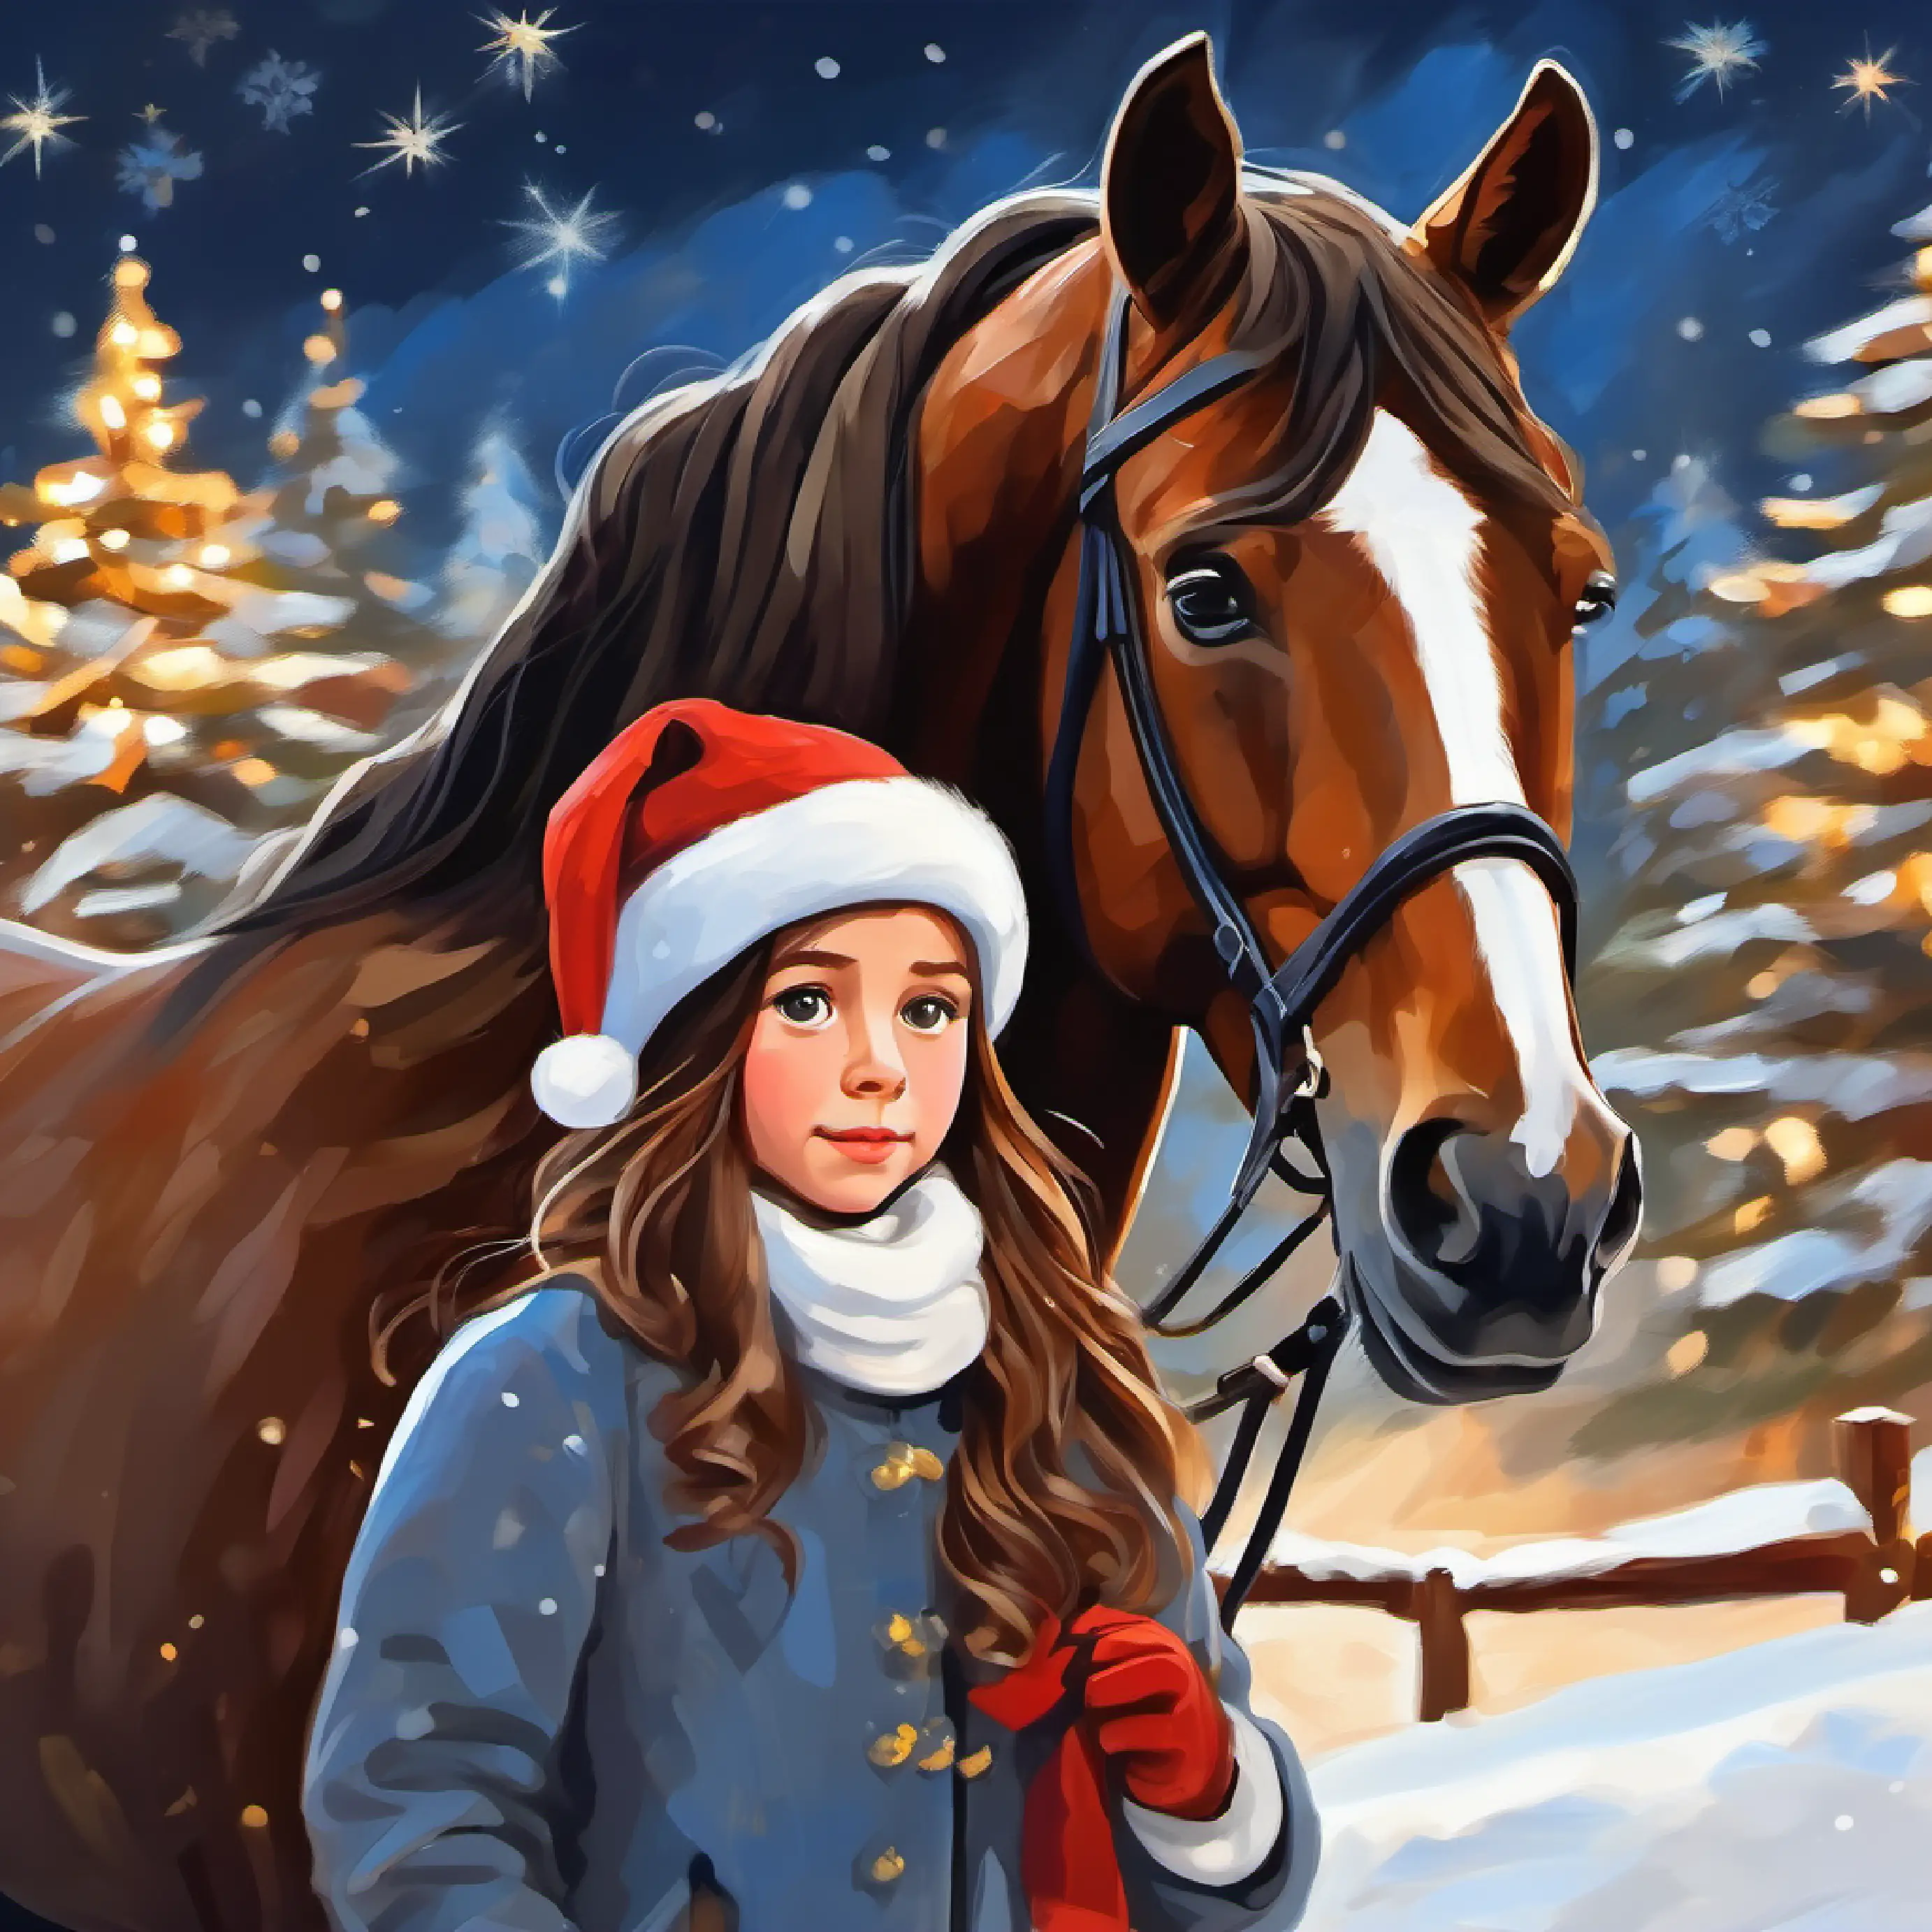 Brave young girl with hopeful eyes and long brown hair 's awe as she details Majestic horse with intelligent gaze and gleaming coat's features